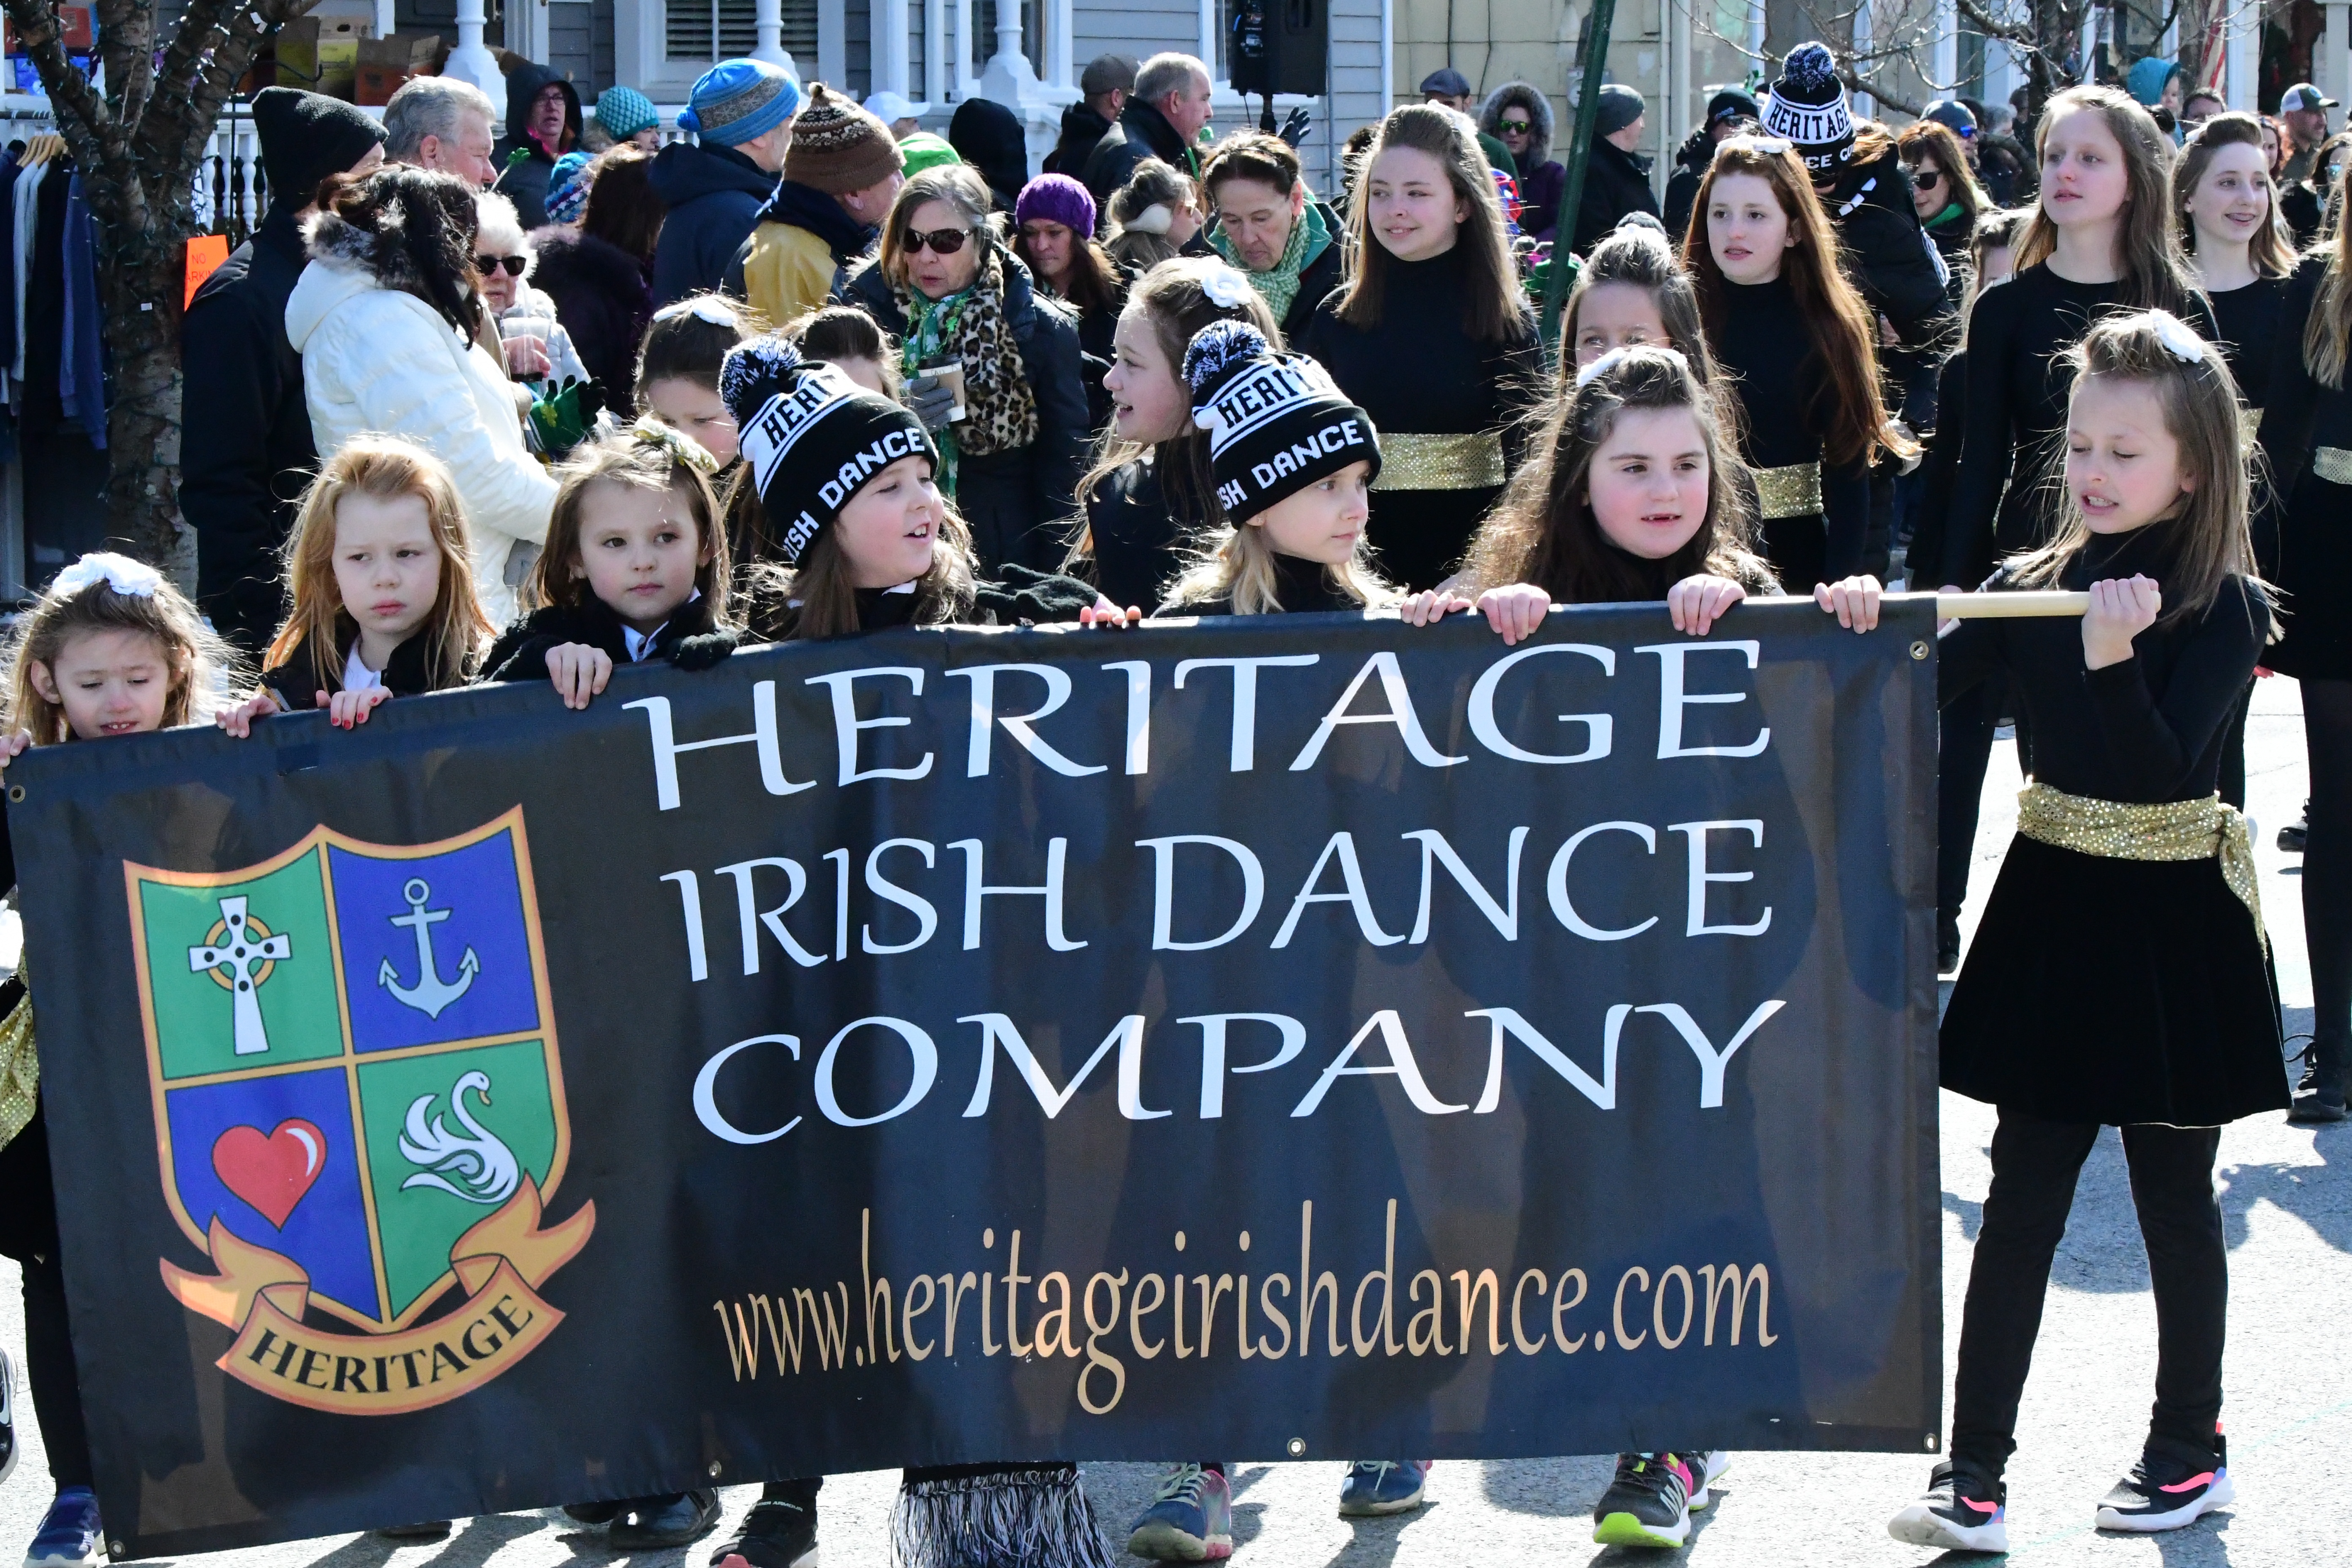 The 2022 St Patrick's Day Parade hosted by the Friendly Sons of St Patrick Hunterdon County took place in Clinton on March 13.
